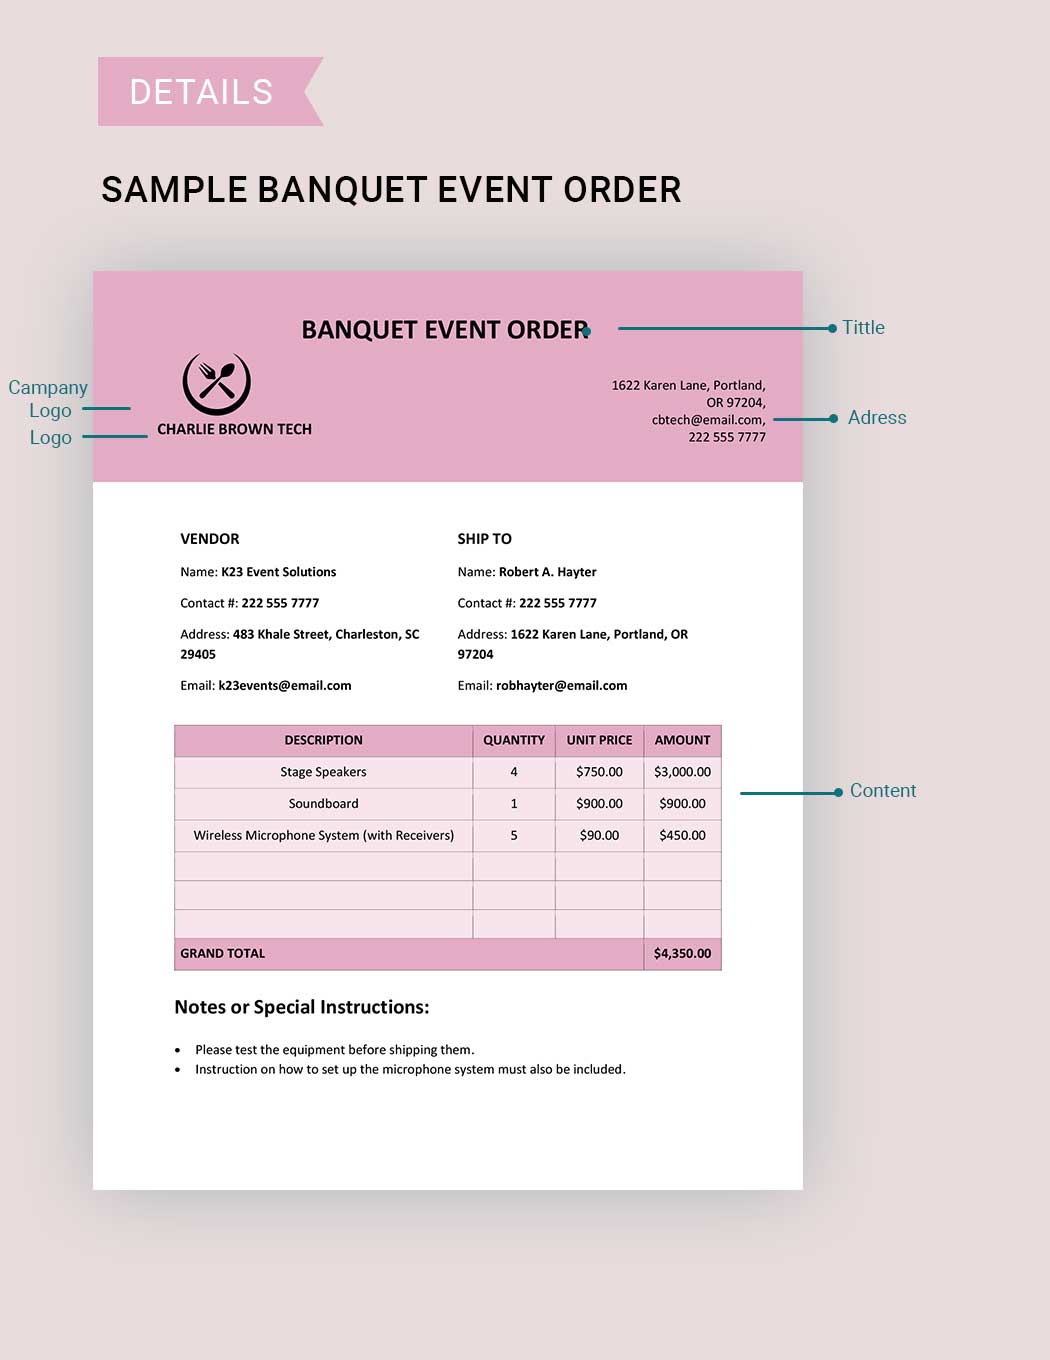 Free Sample Banquet Event Order Template Download in Word, Google